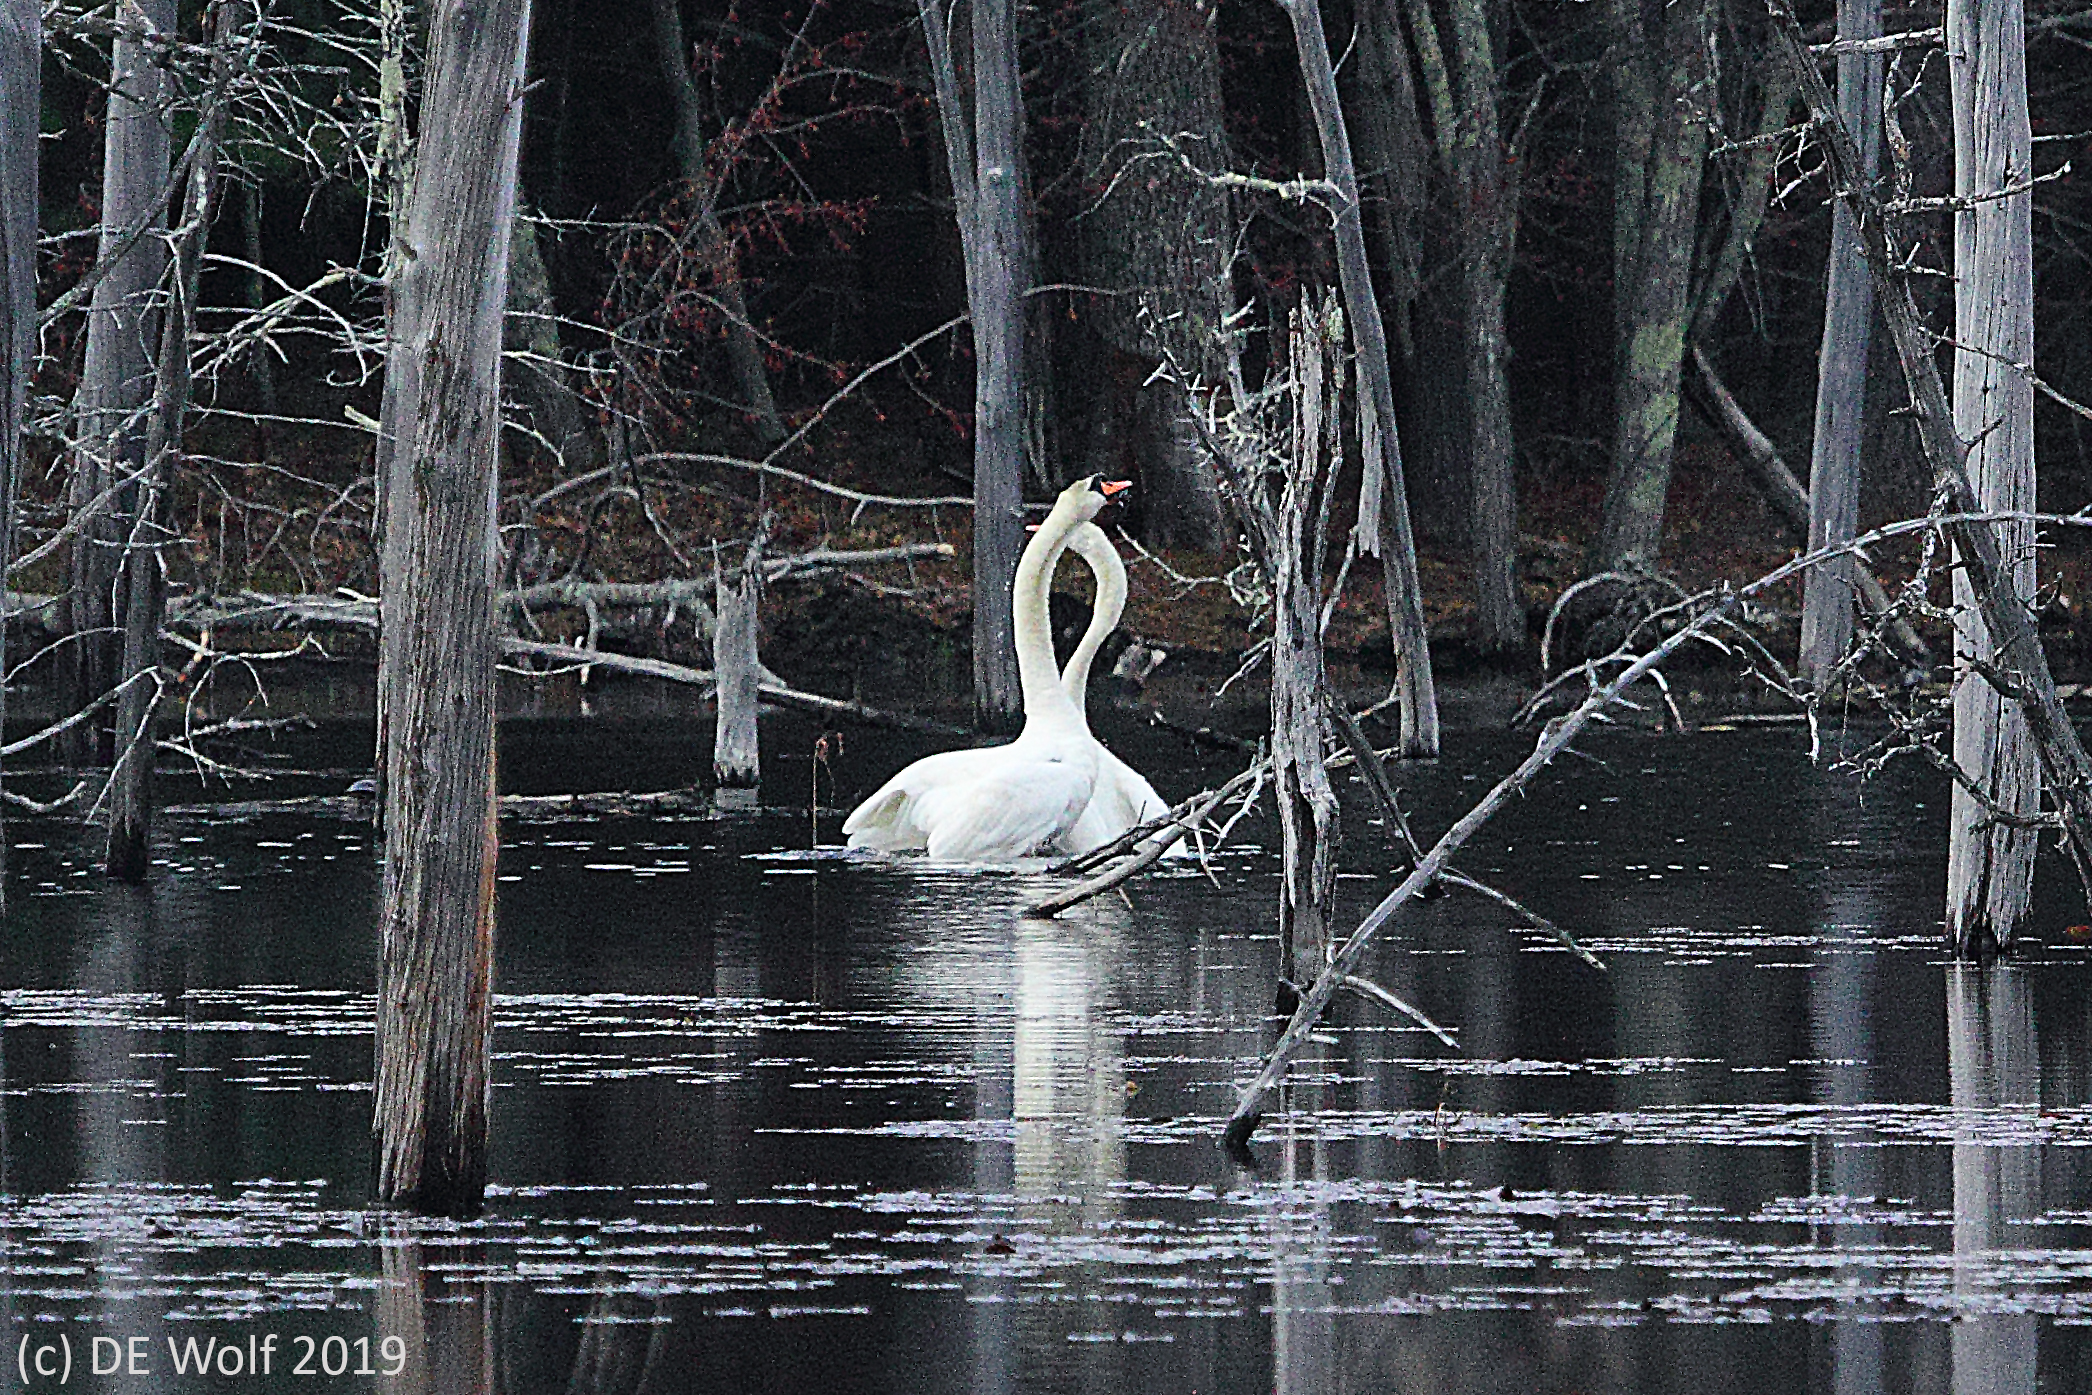 12. Swans Courting